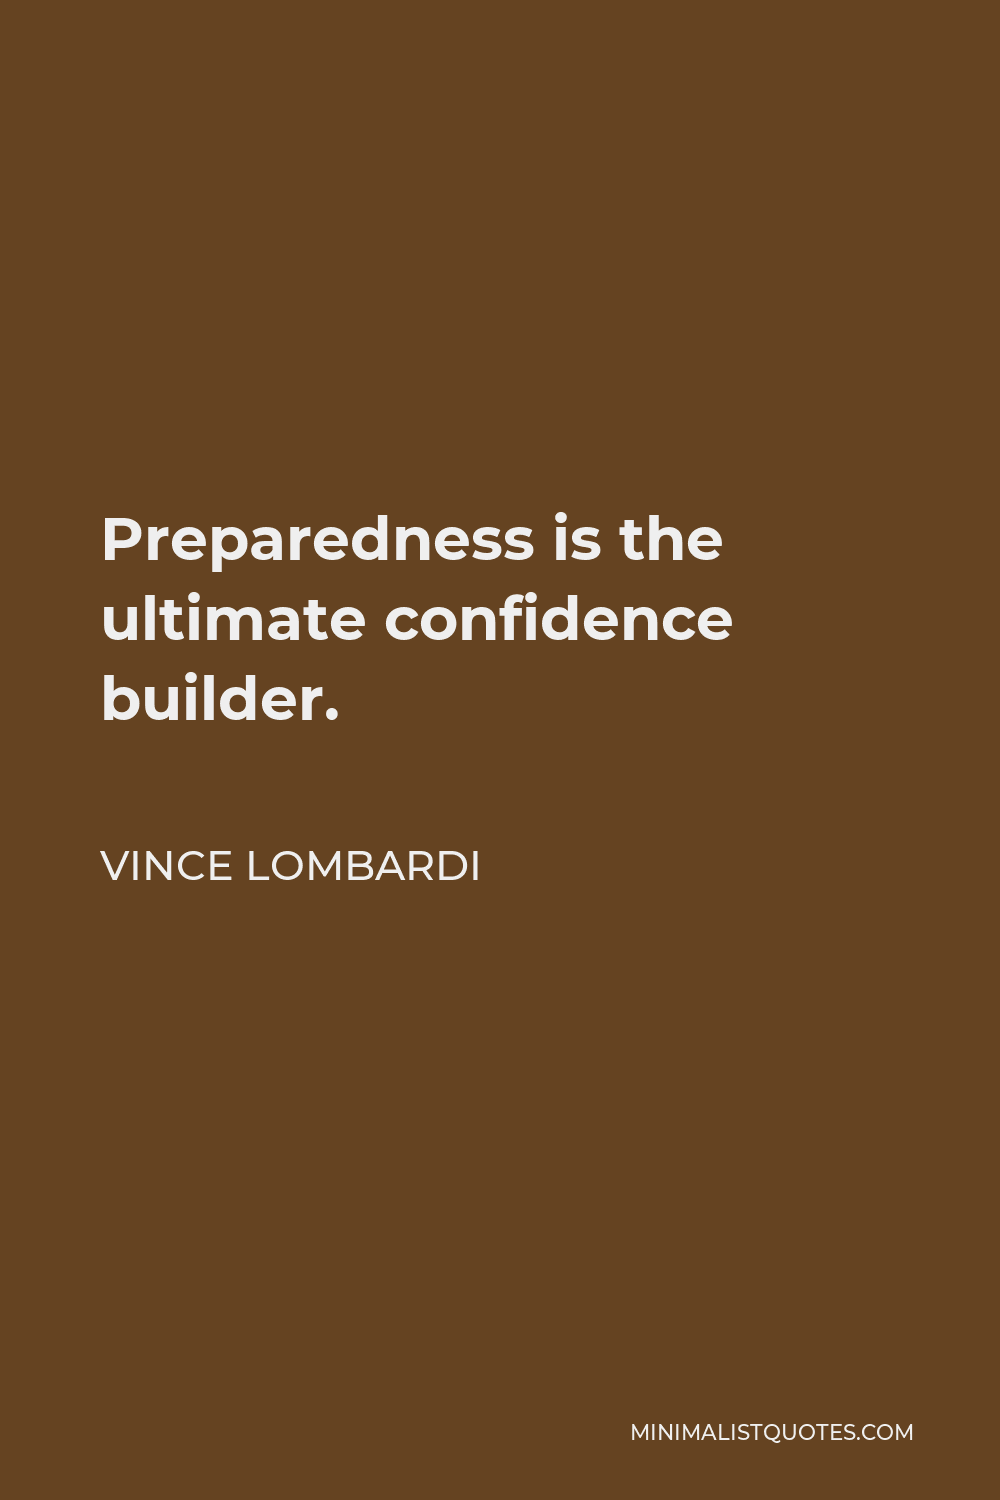 Vince Lombardi Quote - Preparedness is the ultimate confidence builder.